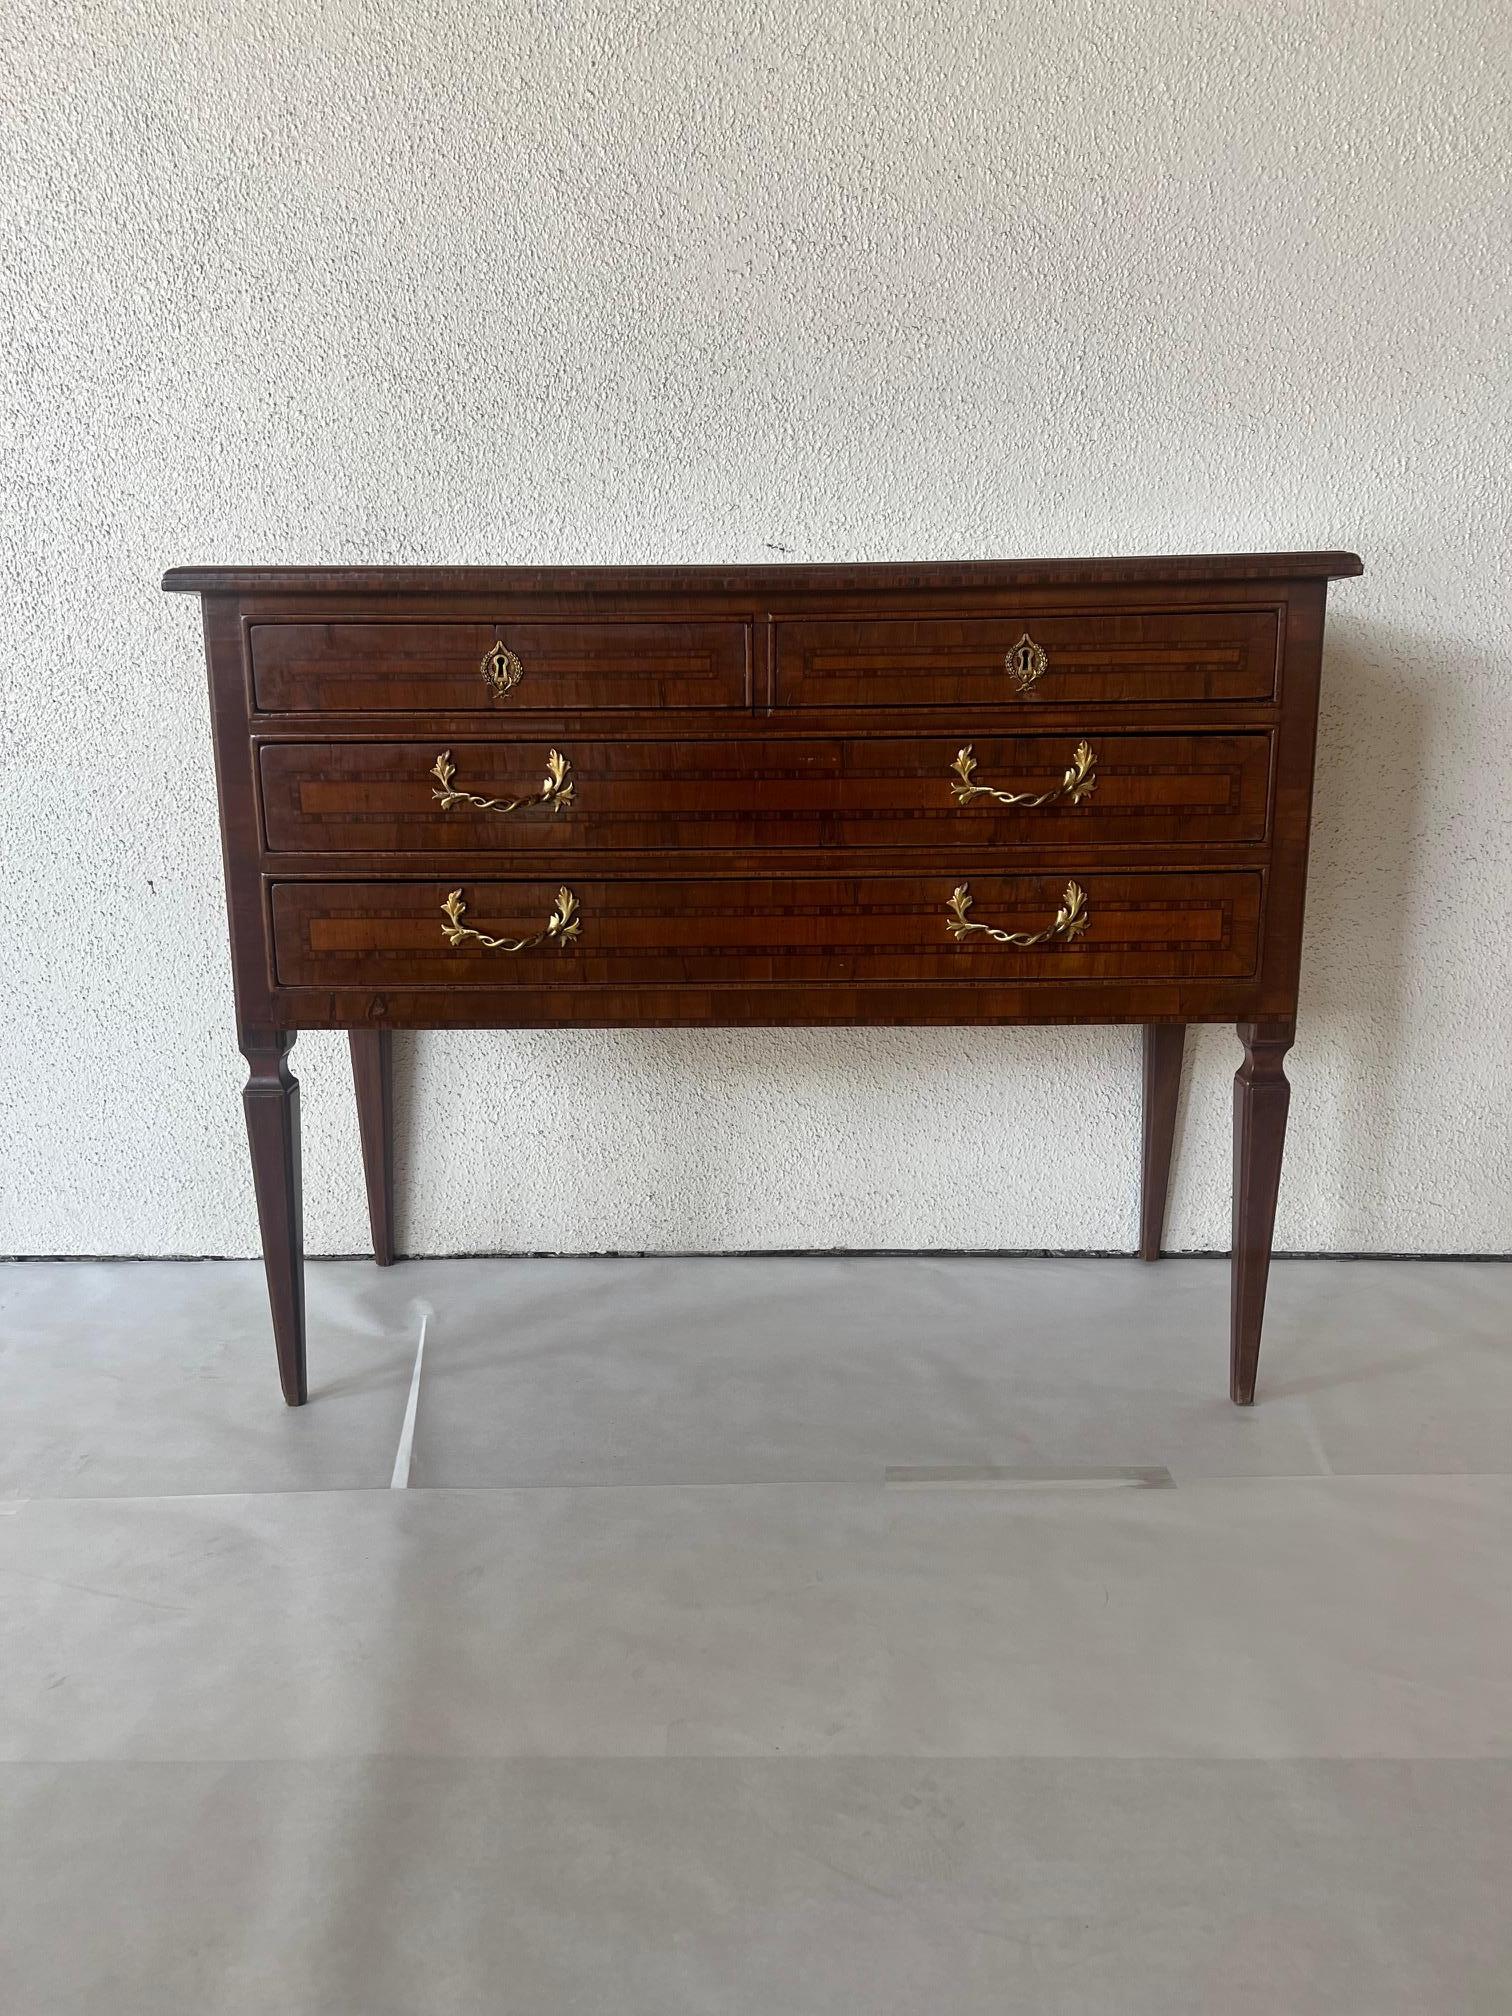 18th c Italian commode 2 drawer. walnut marquetry beautiful inlaid details throughout chest. original hardware.